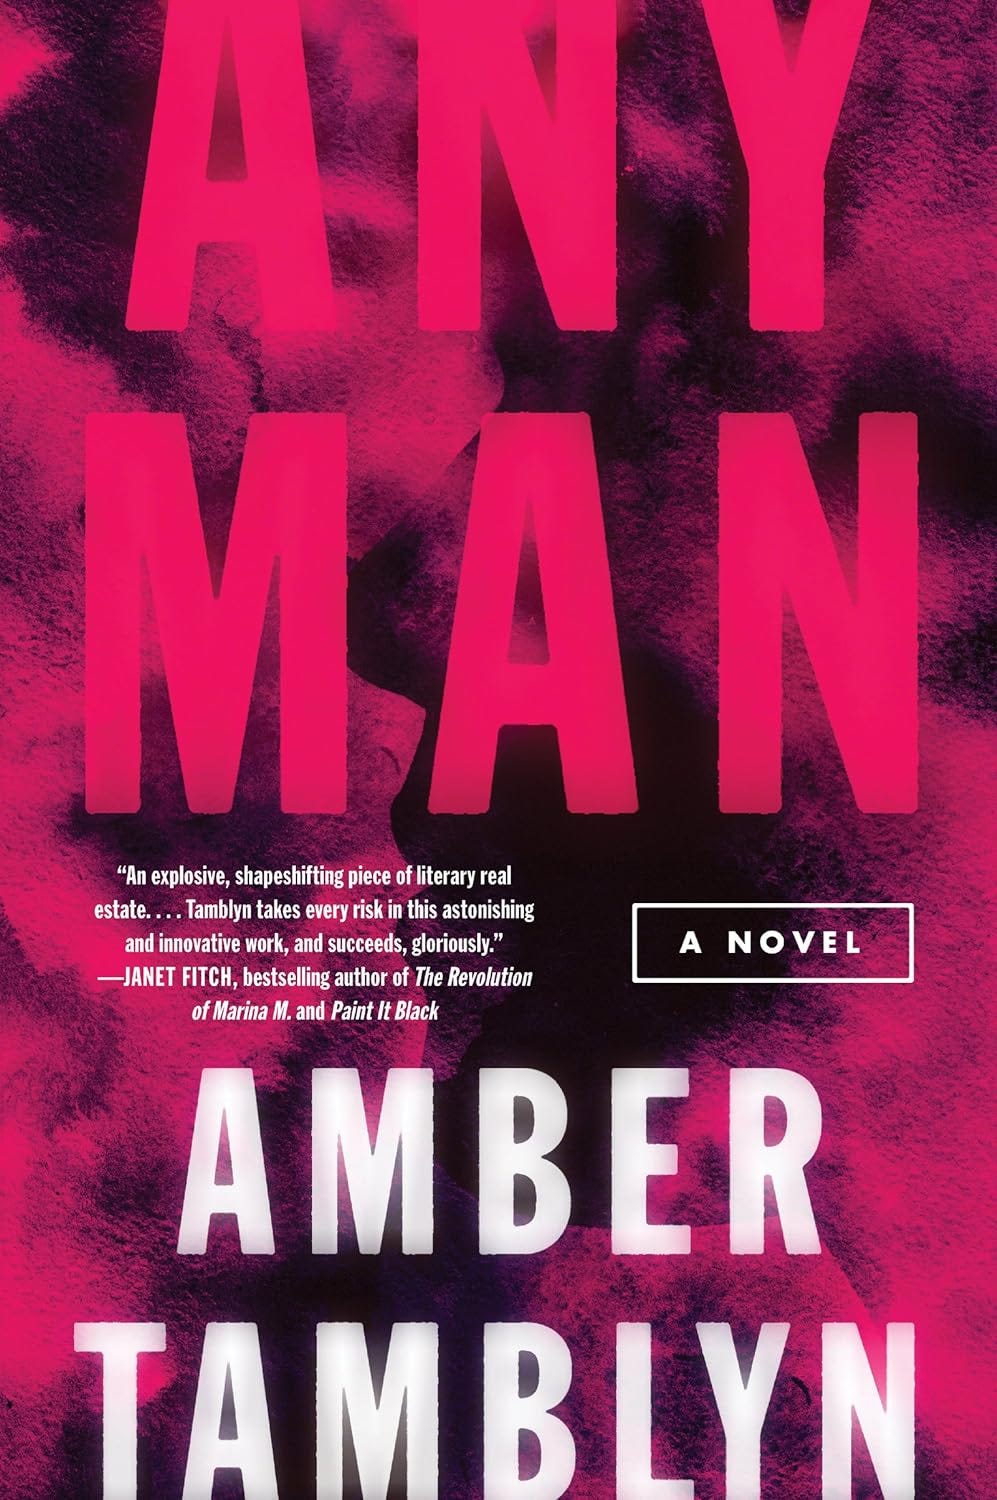 The book cover for "Any Man: A Novel." The background is an abstract, textured mix of fuchsia and black. "Any Man" is written in pink. "Amber Tamblyn" is written in white. The quote on the cover reads: "An explosive, shapeshifting piece of literary real estate....Tamblyn takes every risk in this astonishing and innovative work, and succeeds, gloriously." —Janet Fitch, bestselling author of "The Revolution of Marina M." and "Paint It Black."